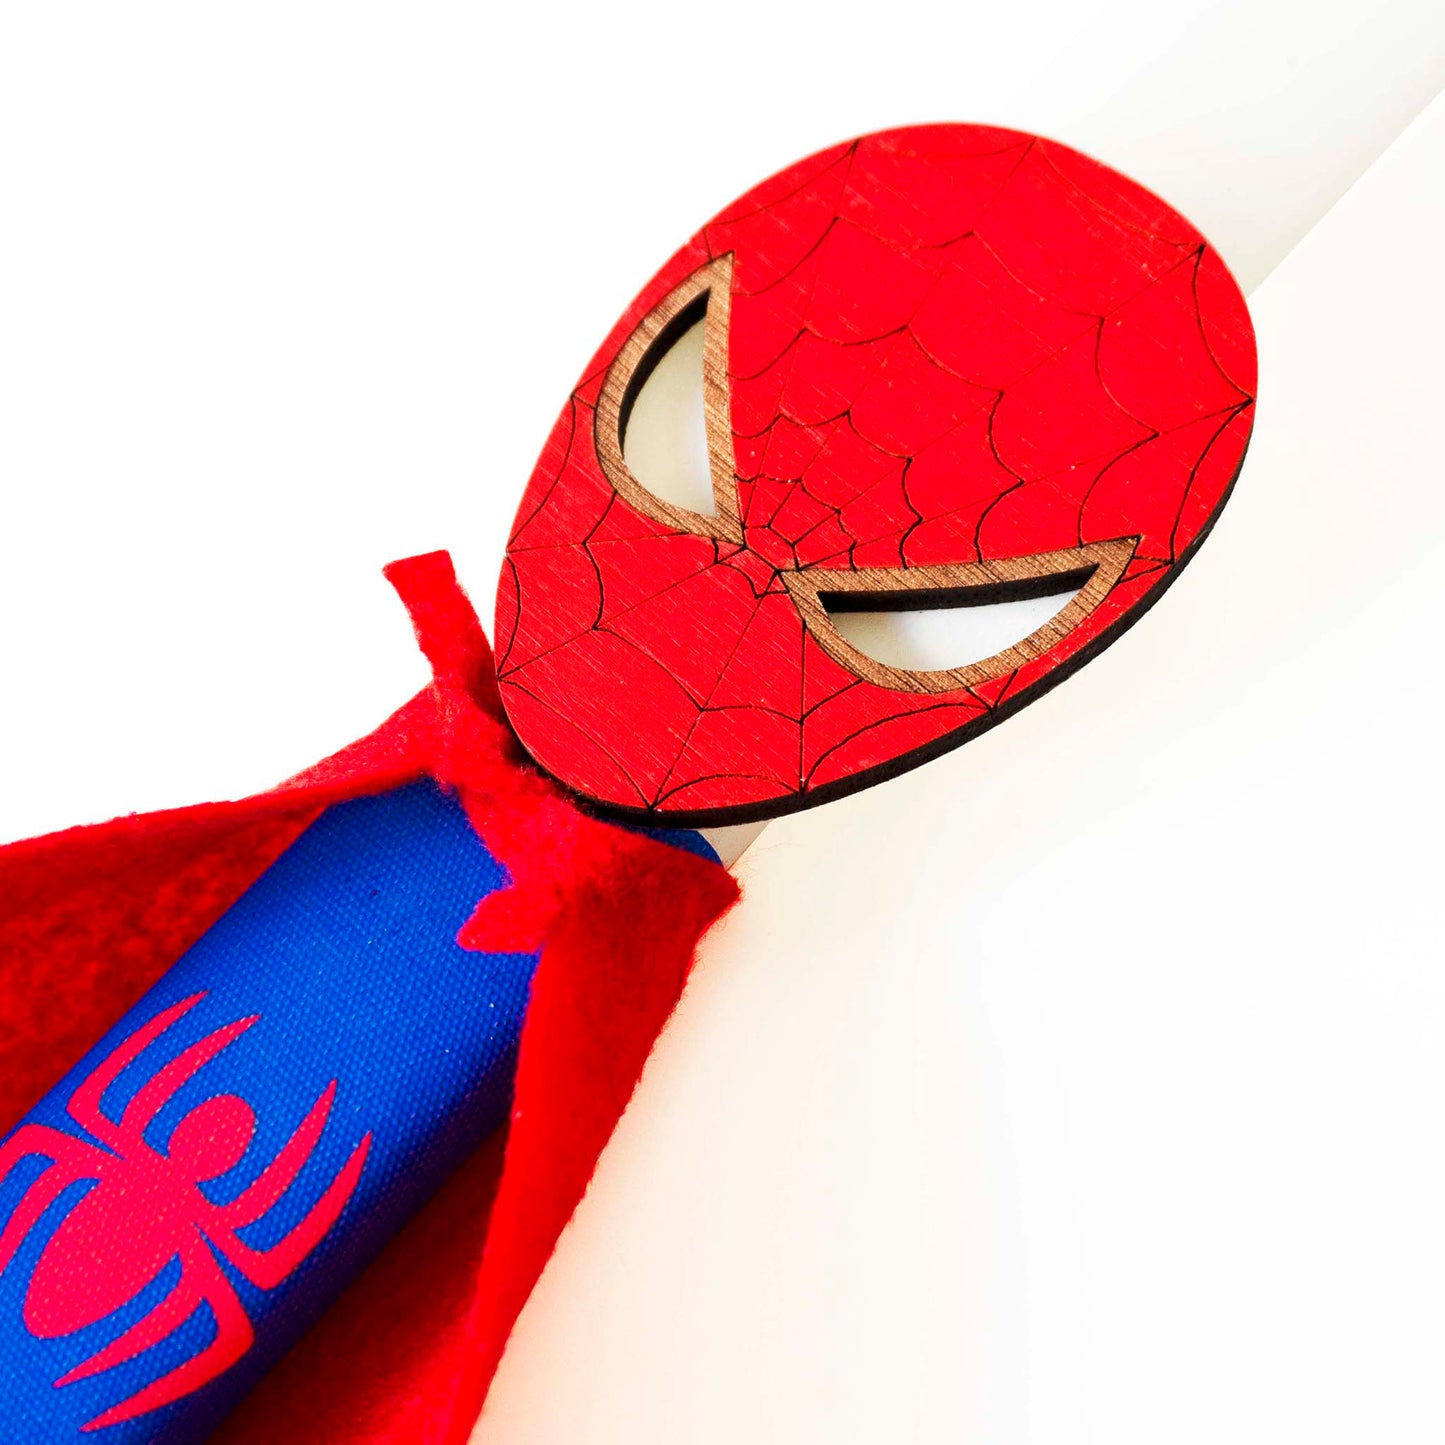 Easter candle "Spiderman" - White candle 30 cm